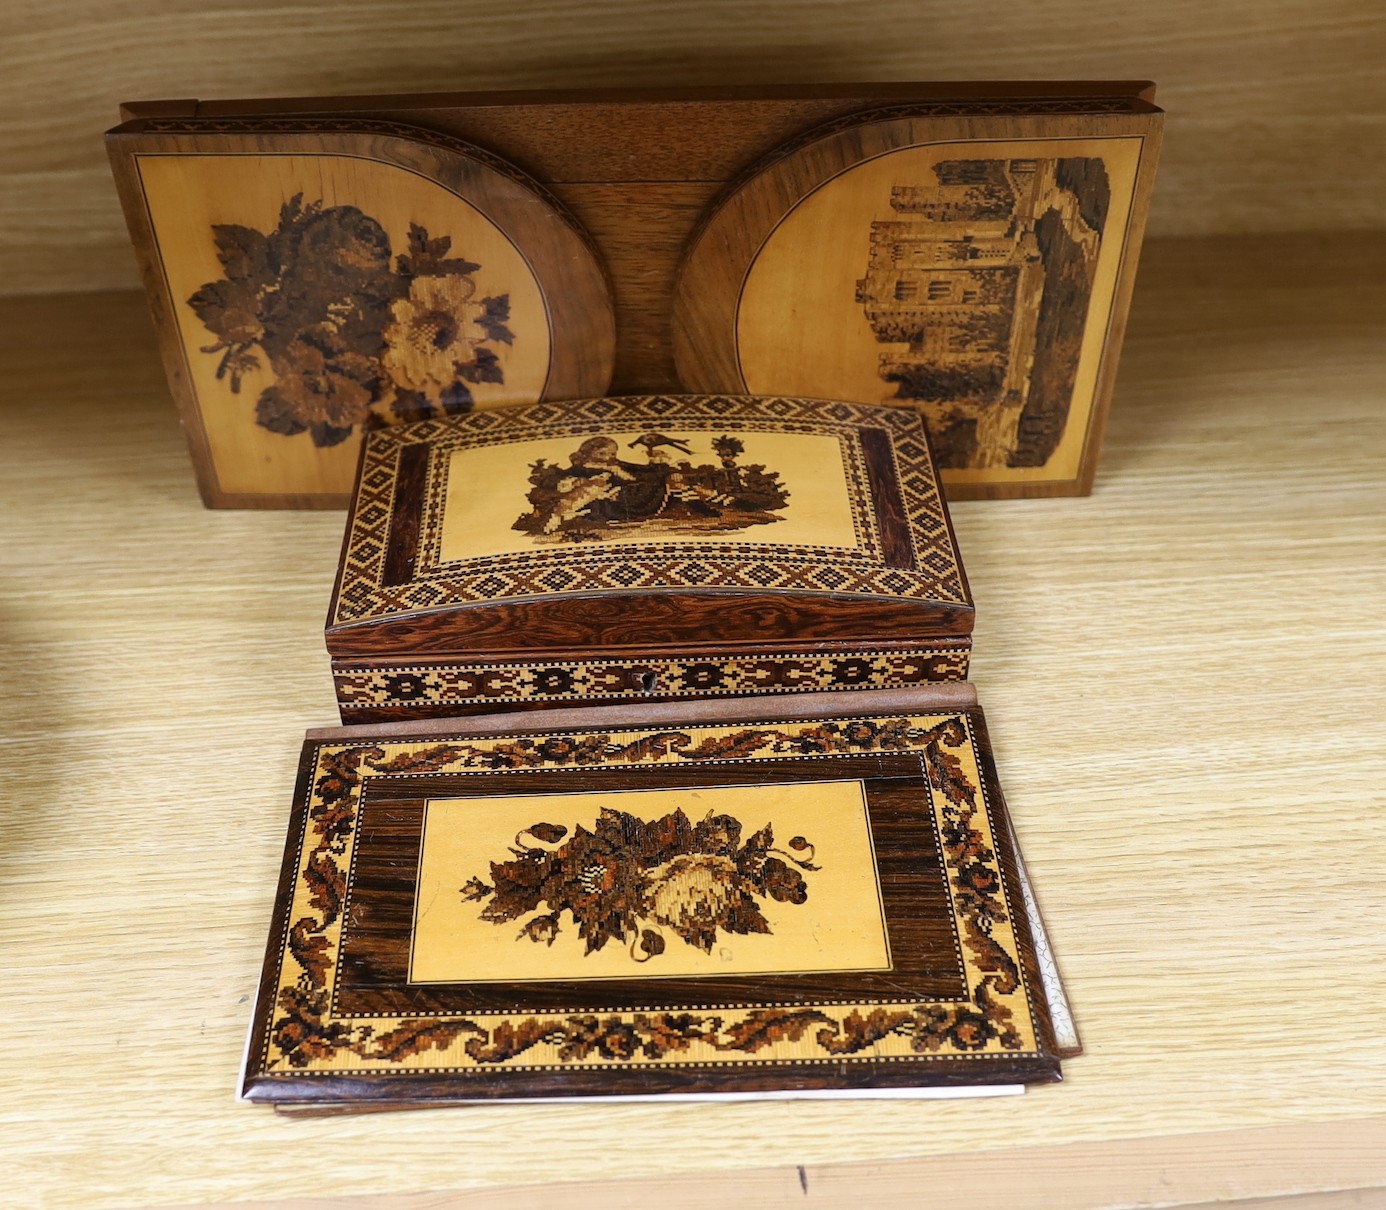 Three pieces of 19th century Tunbridge ware - blotter, a bookslide and a lidded box